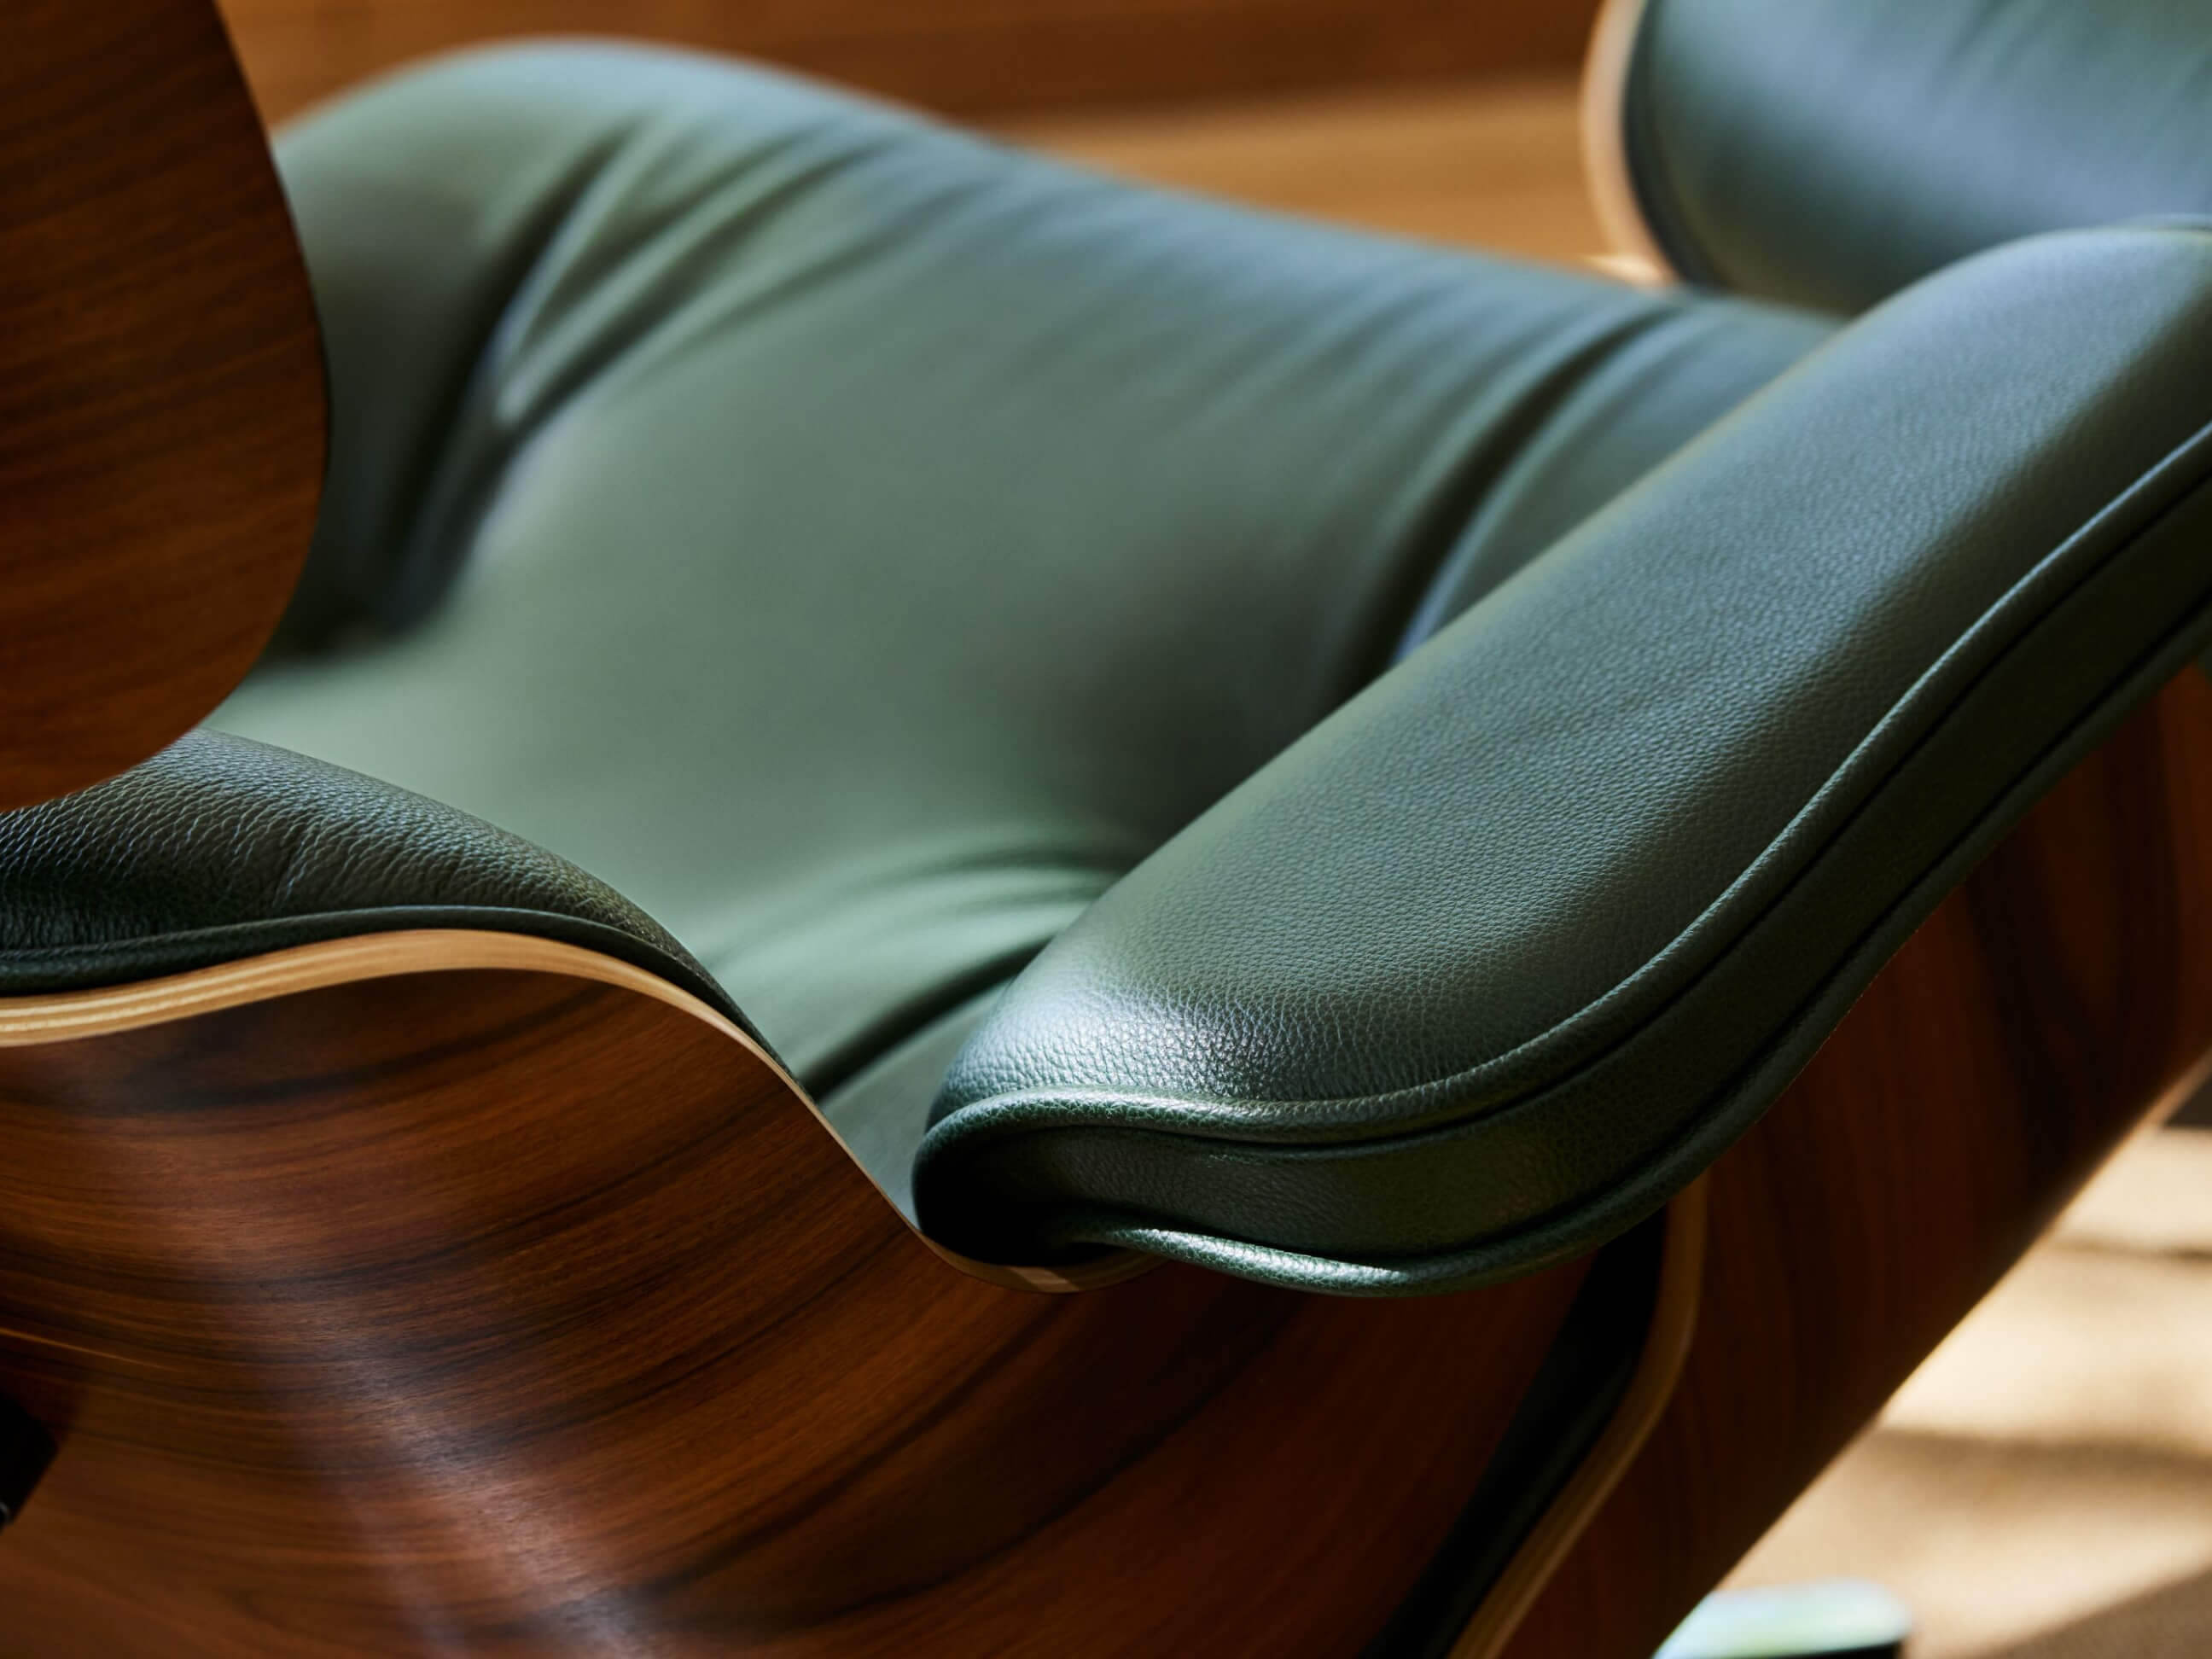 Close-up of an Eames Lounge Chair’s green leather upholstery and the elegantly curved wood shell.